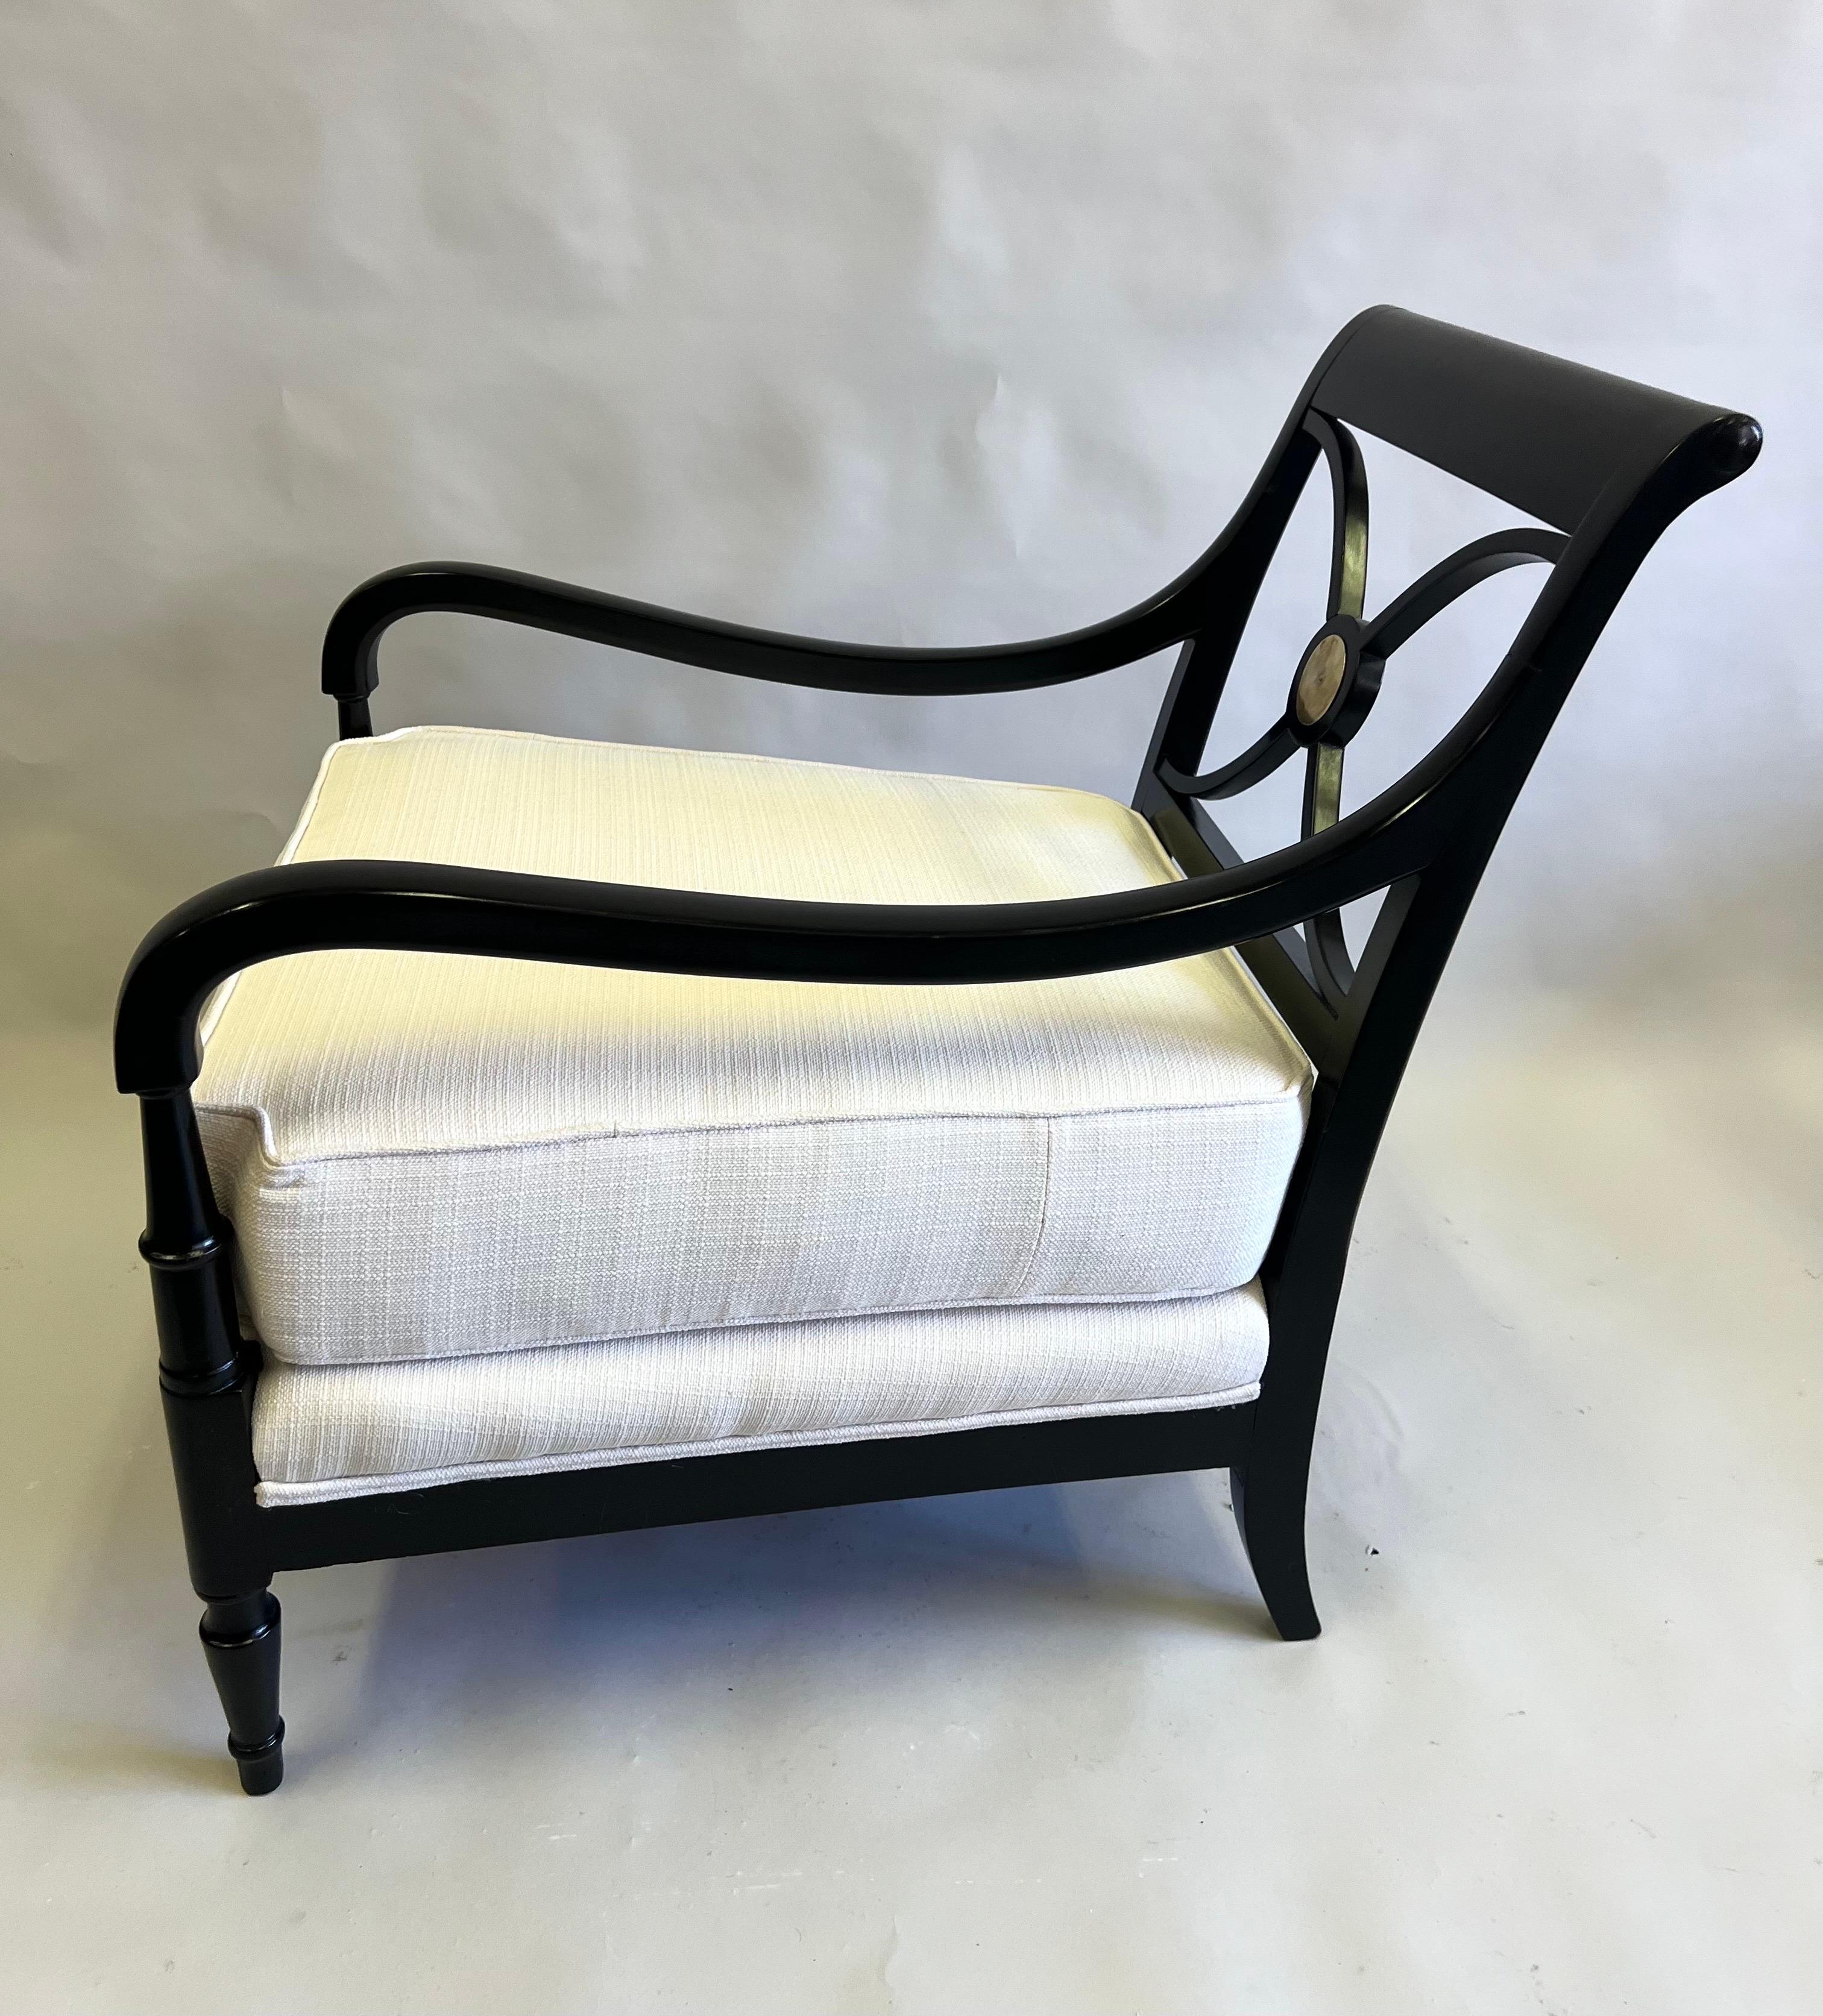 Pair of French Modern Neoclassical Armchairs / Lounge Chairs by Maison Jansen  In Good Condition For Sale In New York, NY